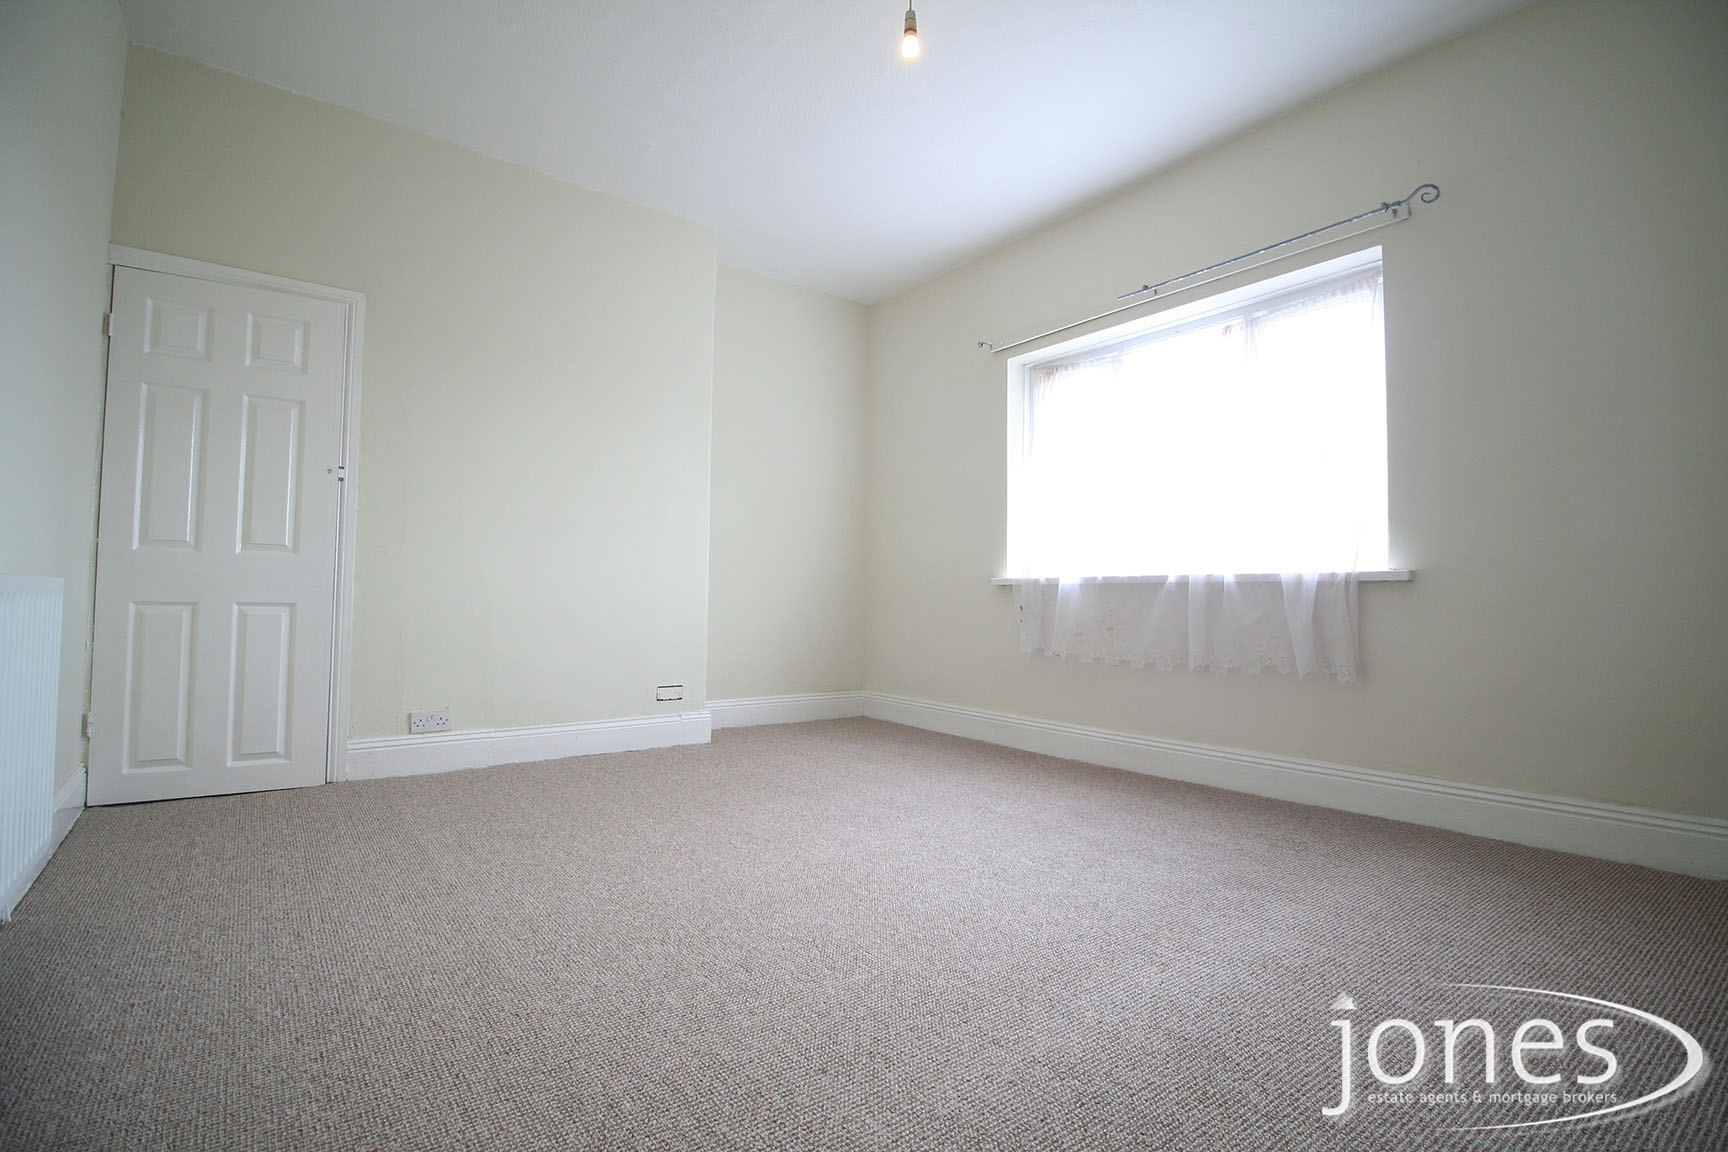 Home for Sale Let - Photo 05 Victoria Road, Thornaby, TS17 6HH